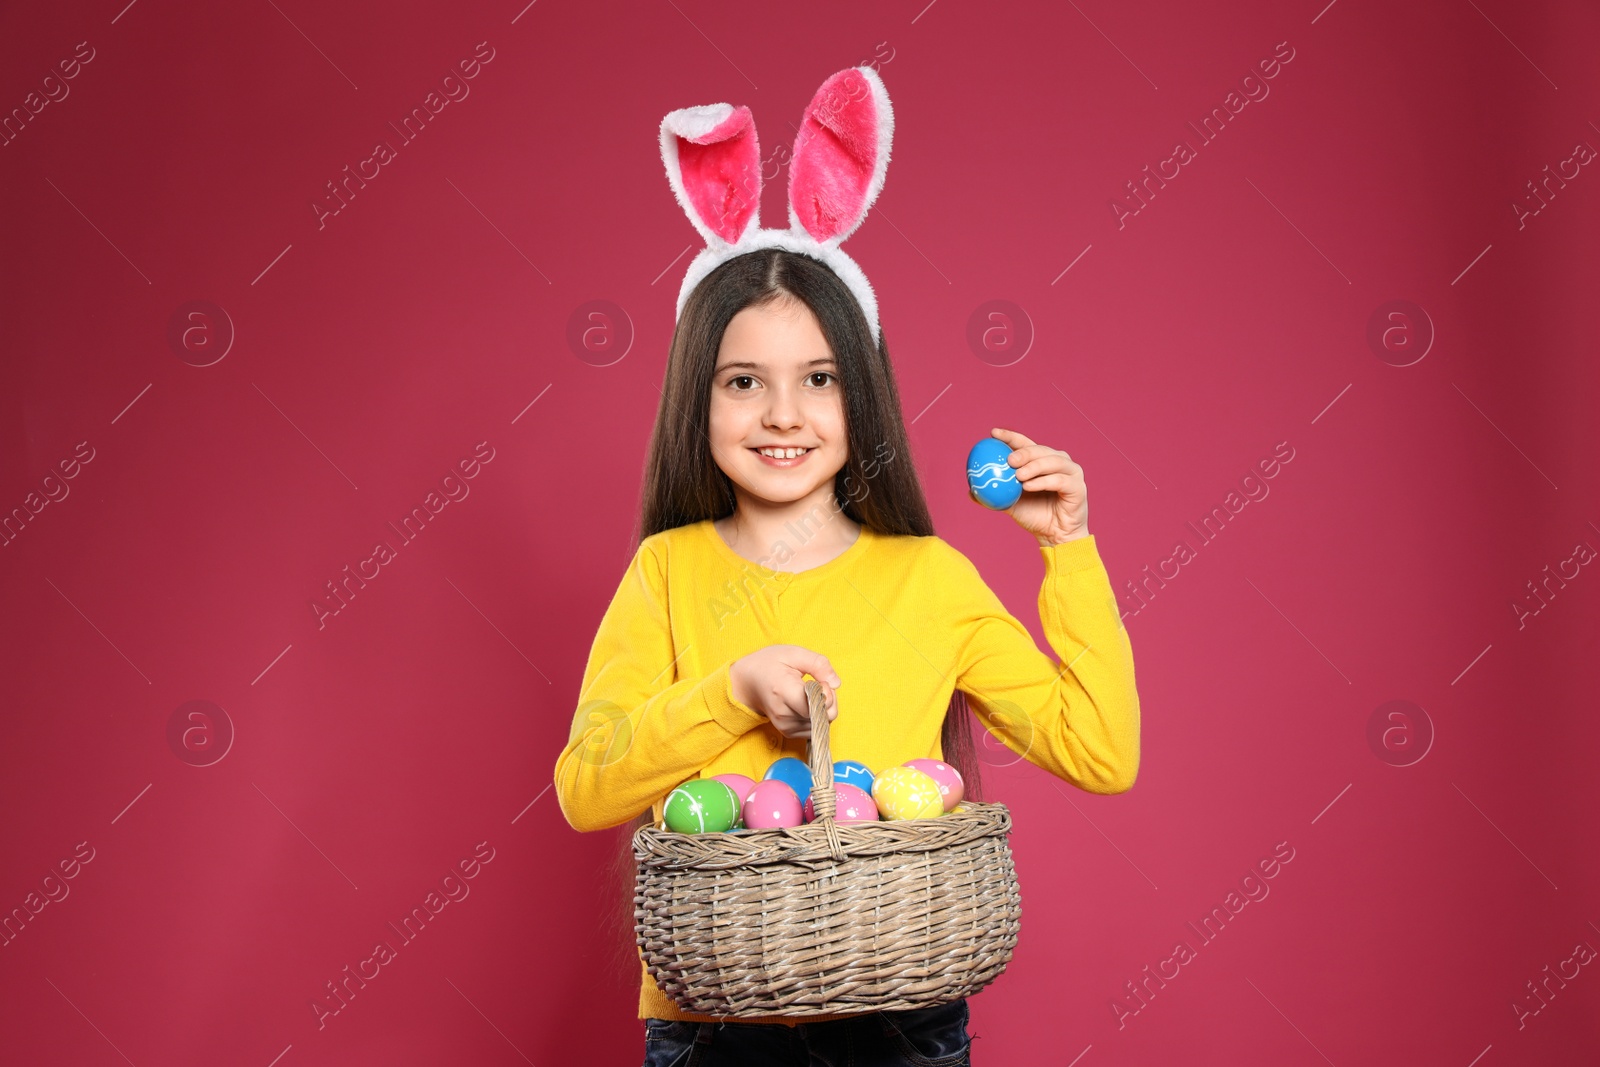 Photo of Little girl in bunny ears headband holding basket with Easter eggs on color background